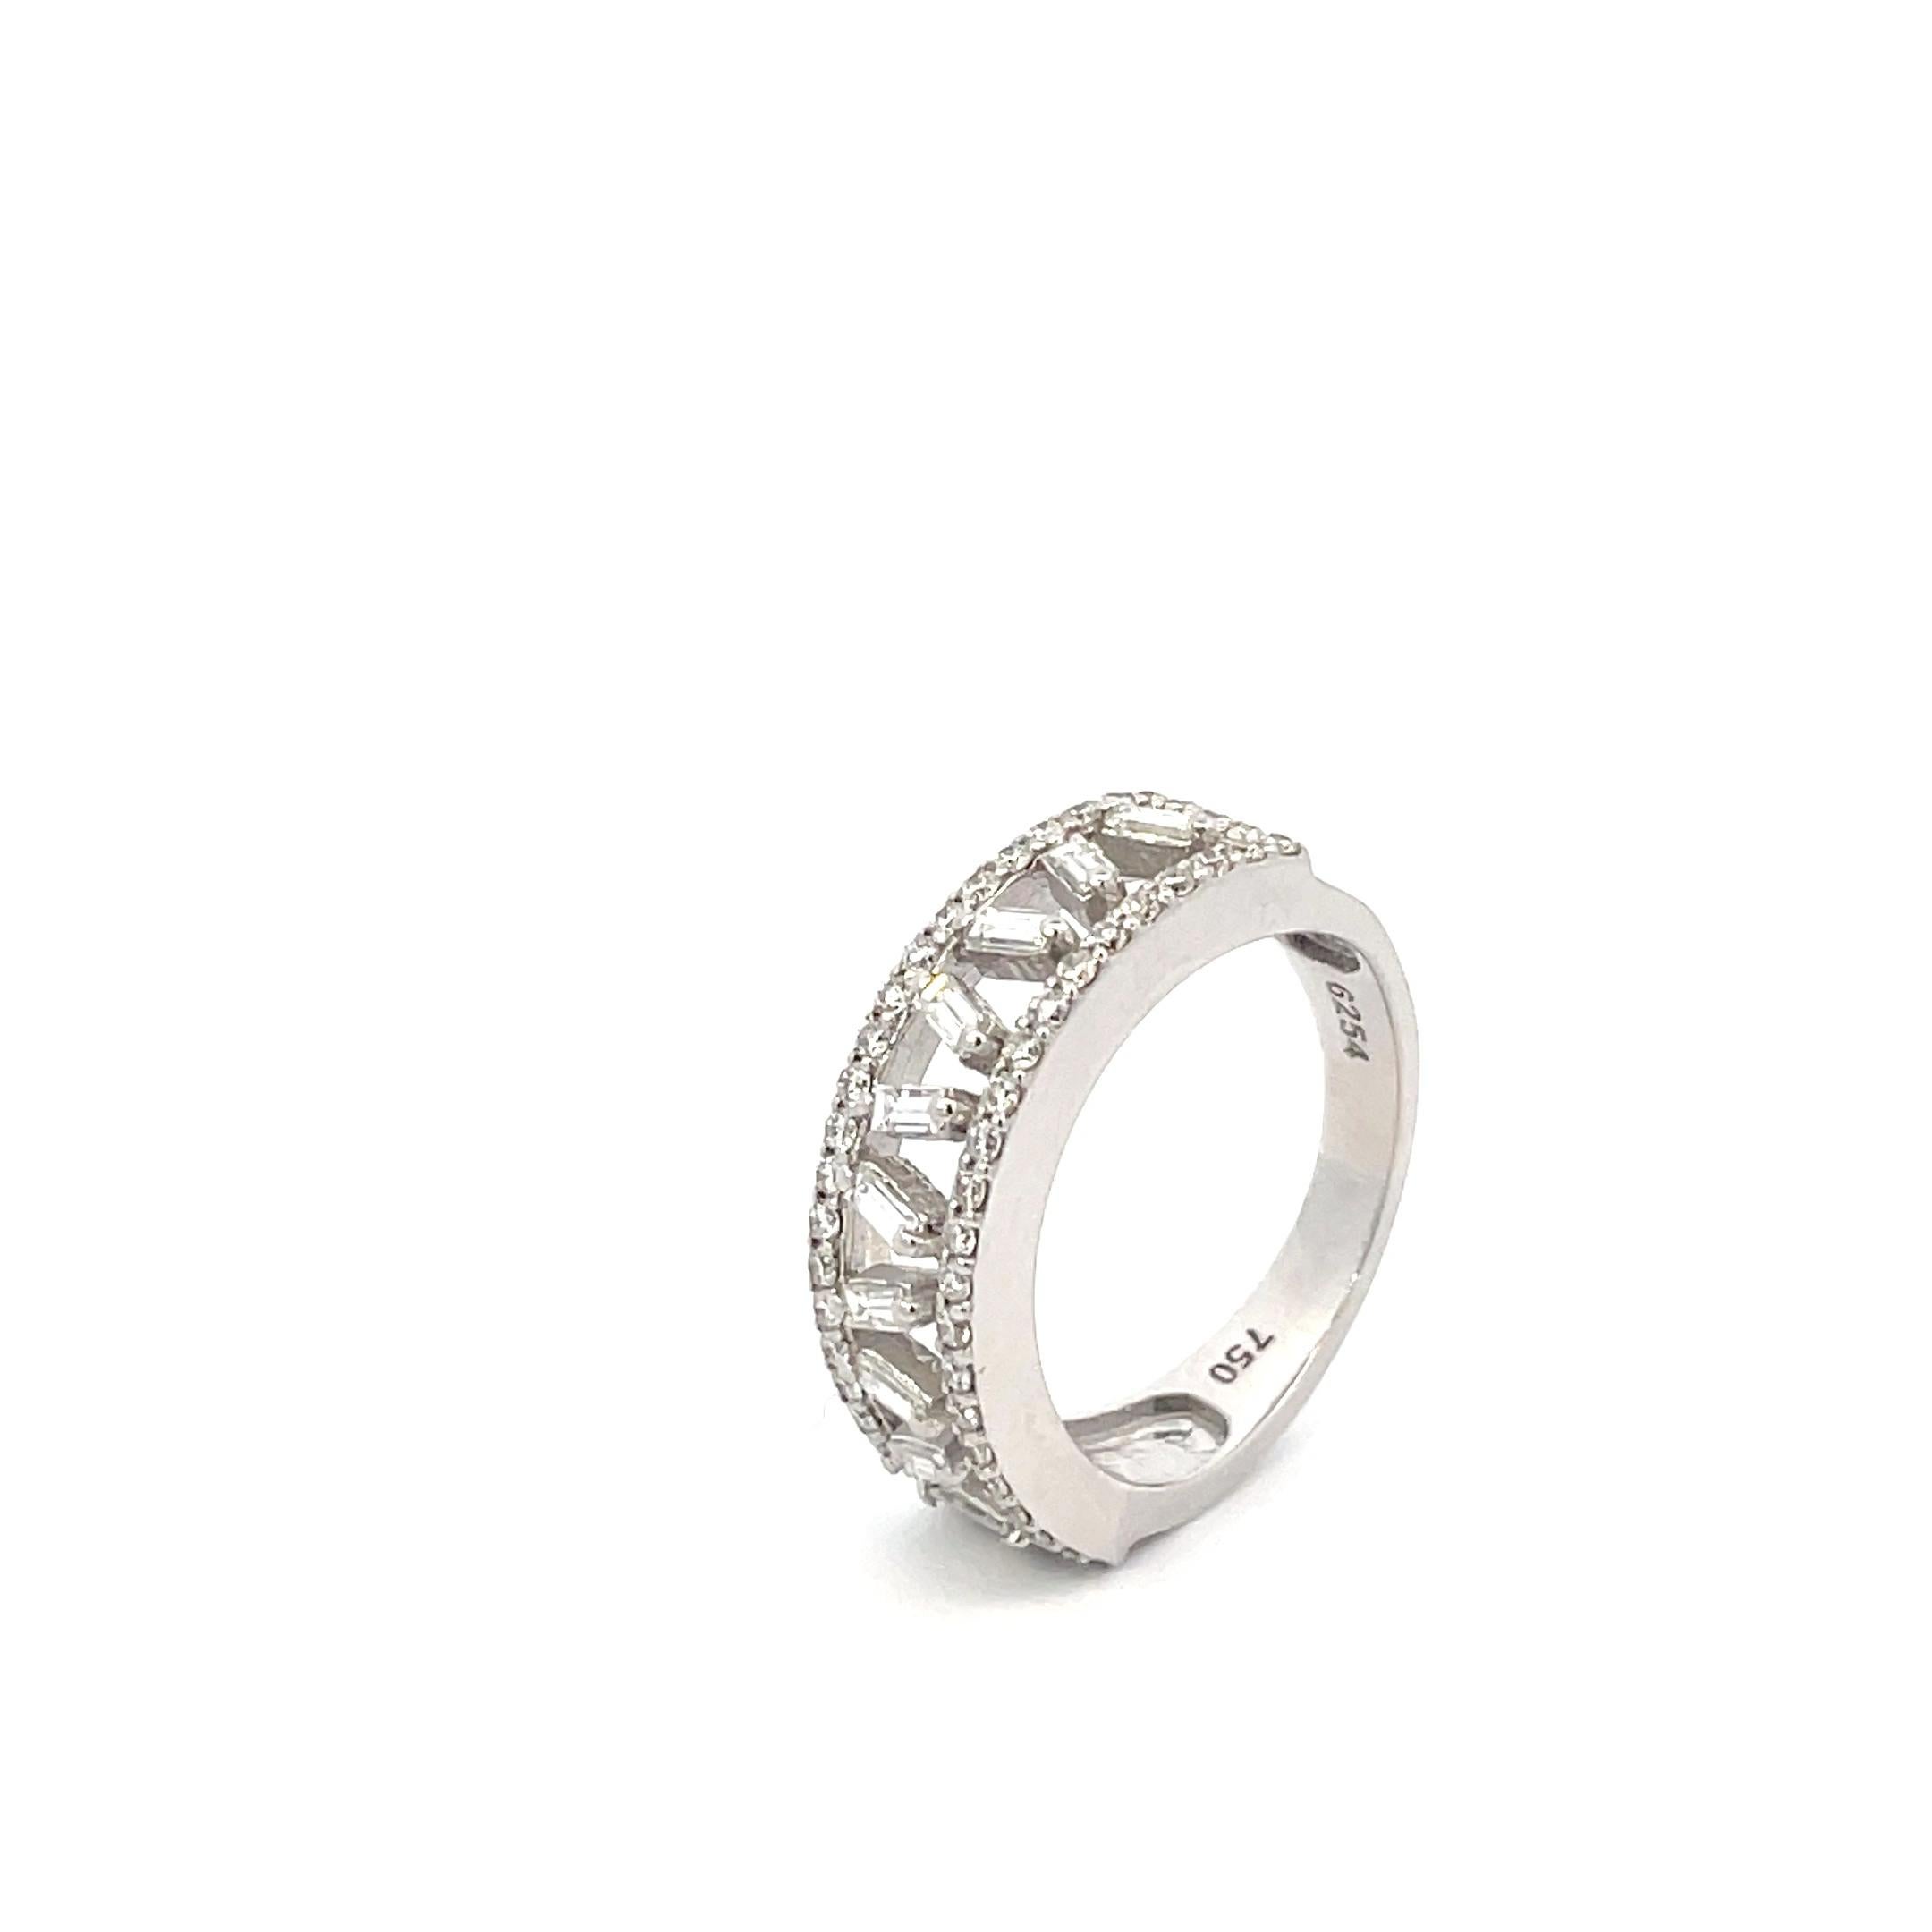 0.90 tcw Baguette Surrounded by Round Diamond Eternity Band, Diamond Ring, Statement Ring, 18k Gold, Engagement Ring.

Astonishing and special combination of baguette diamonds surrounded by round diamonds of this statement ring. Designed in 18K